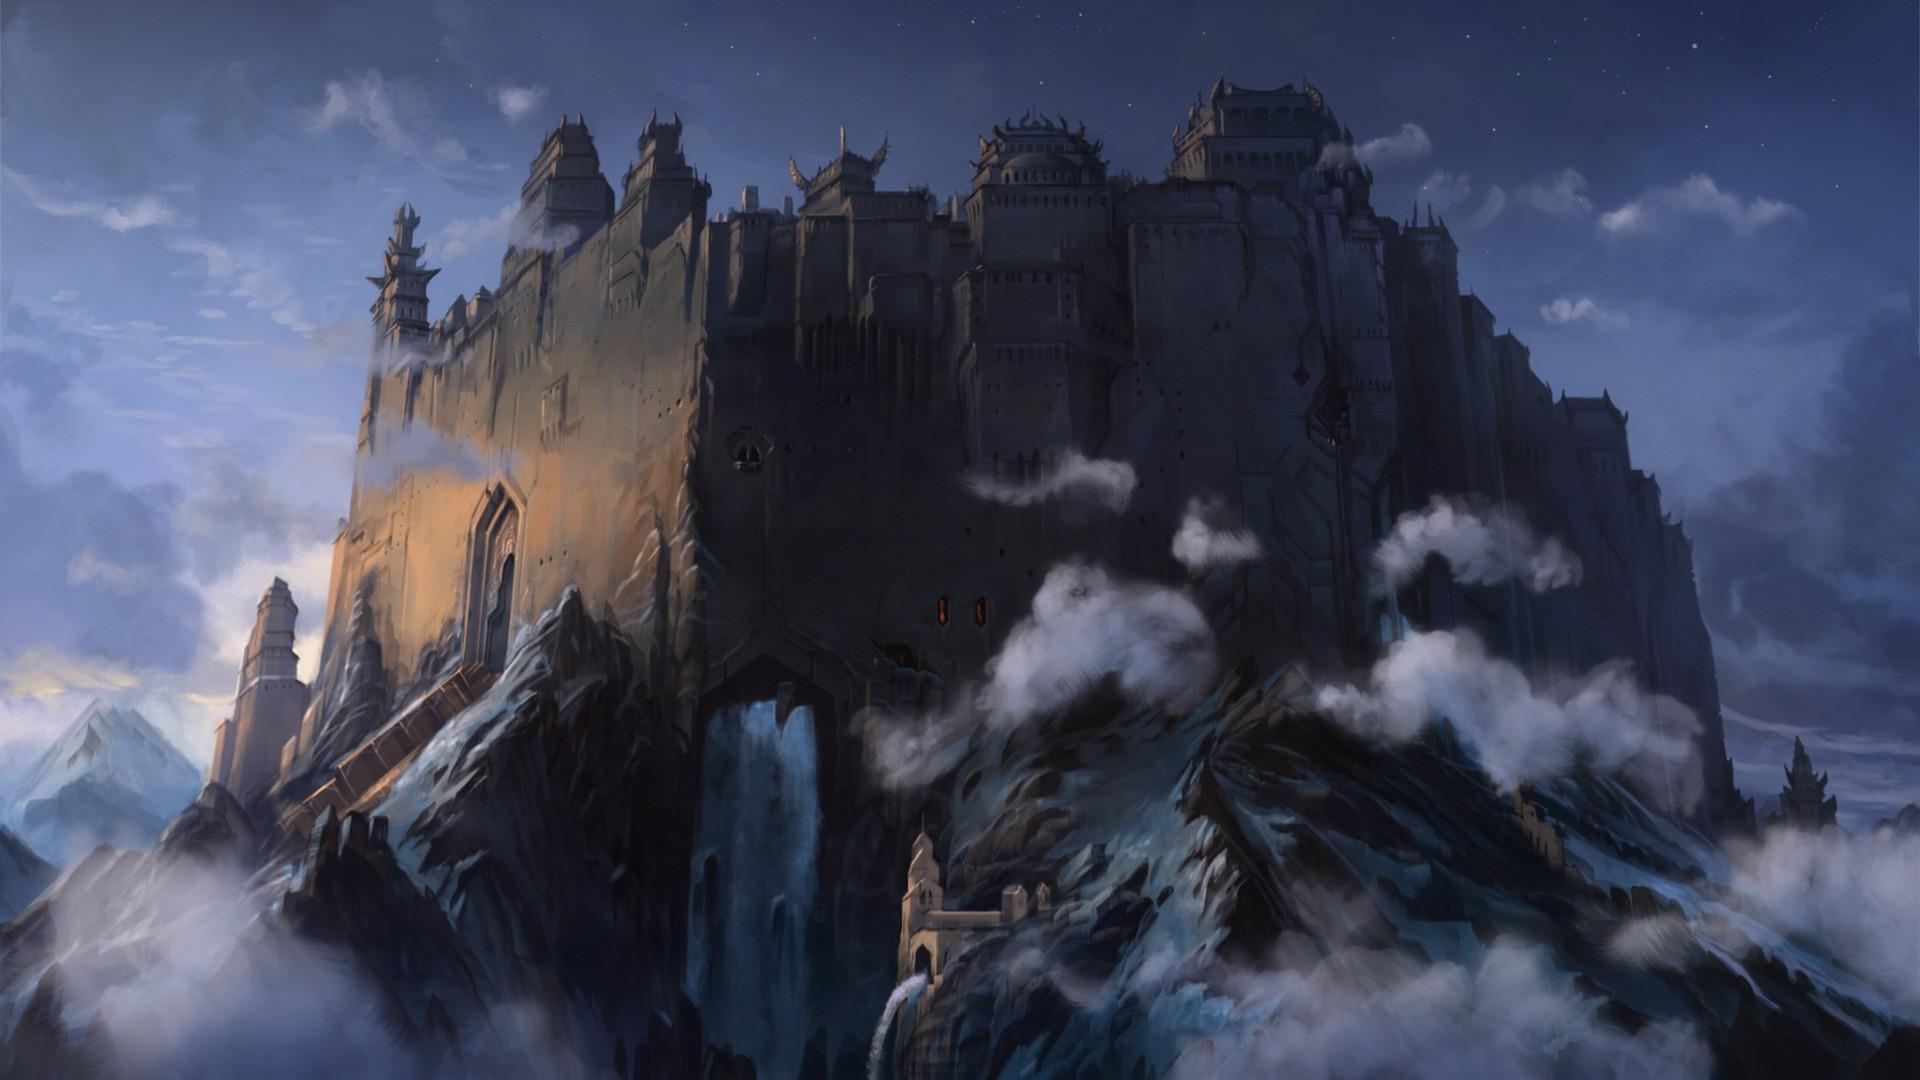 fantasy Art, Artwork, Clouds, Mountain, Forts, Castle